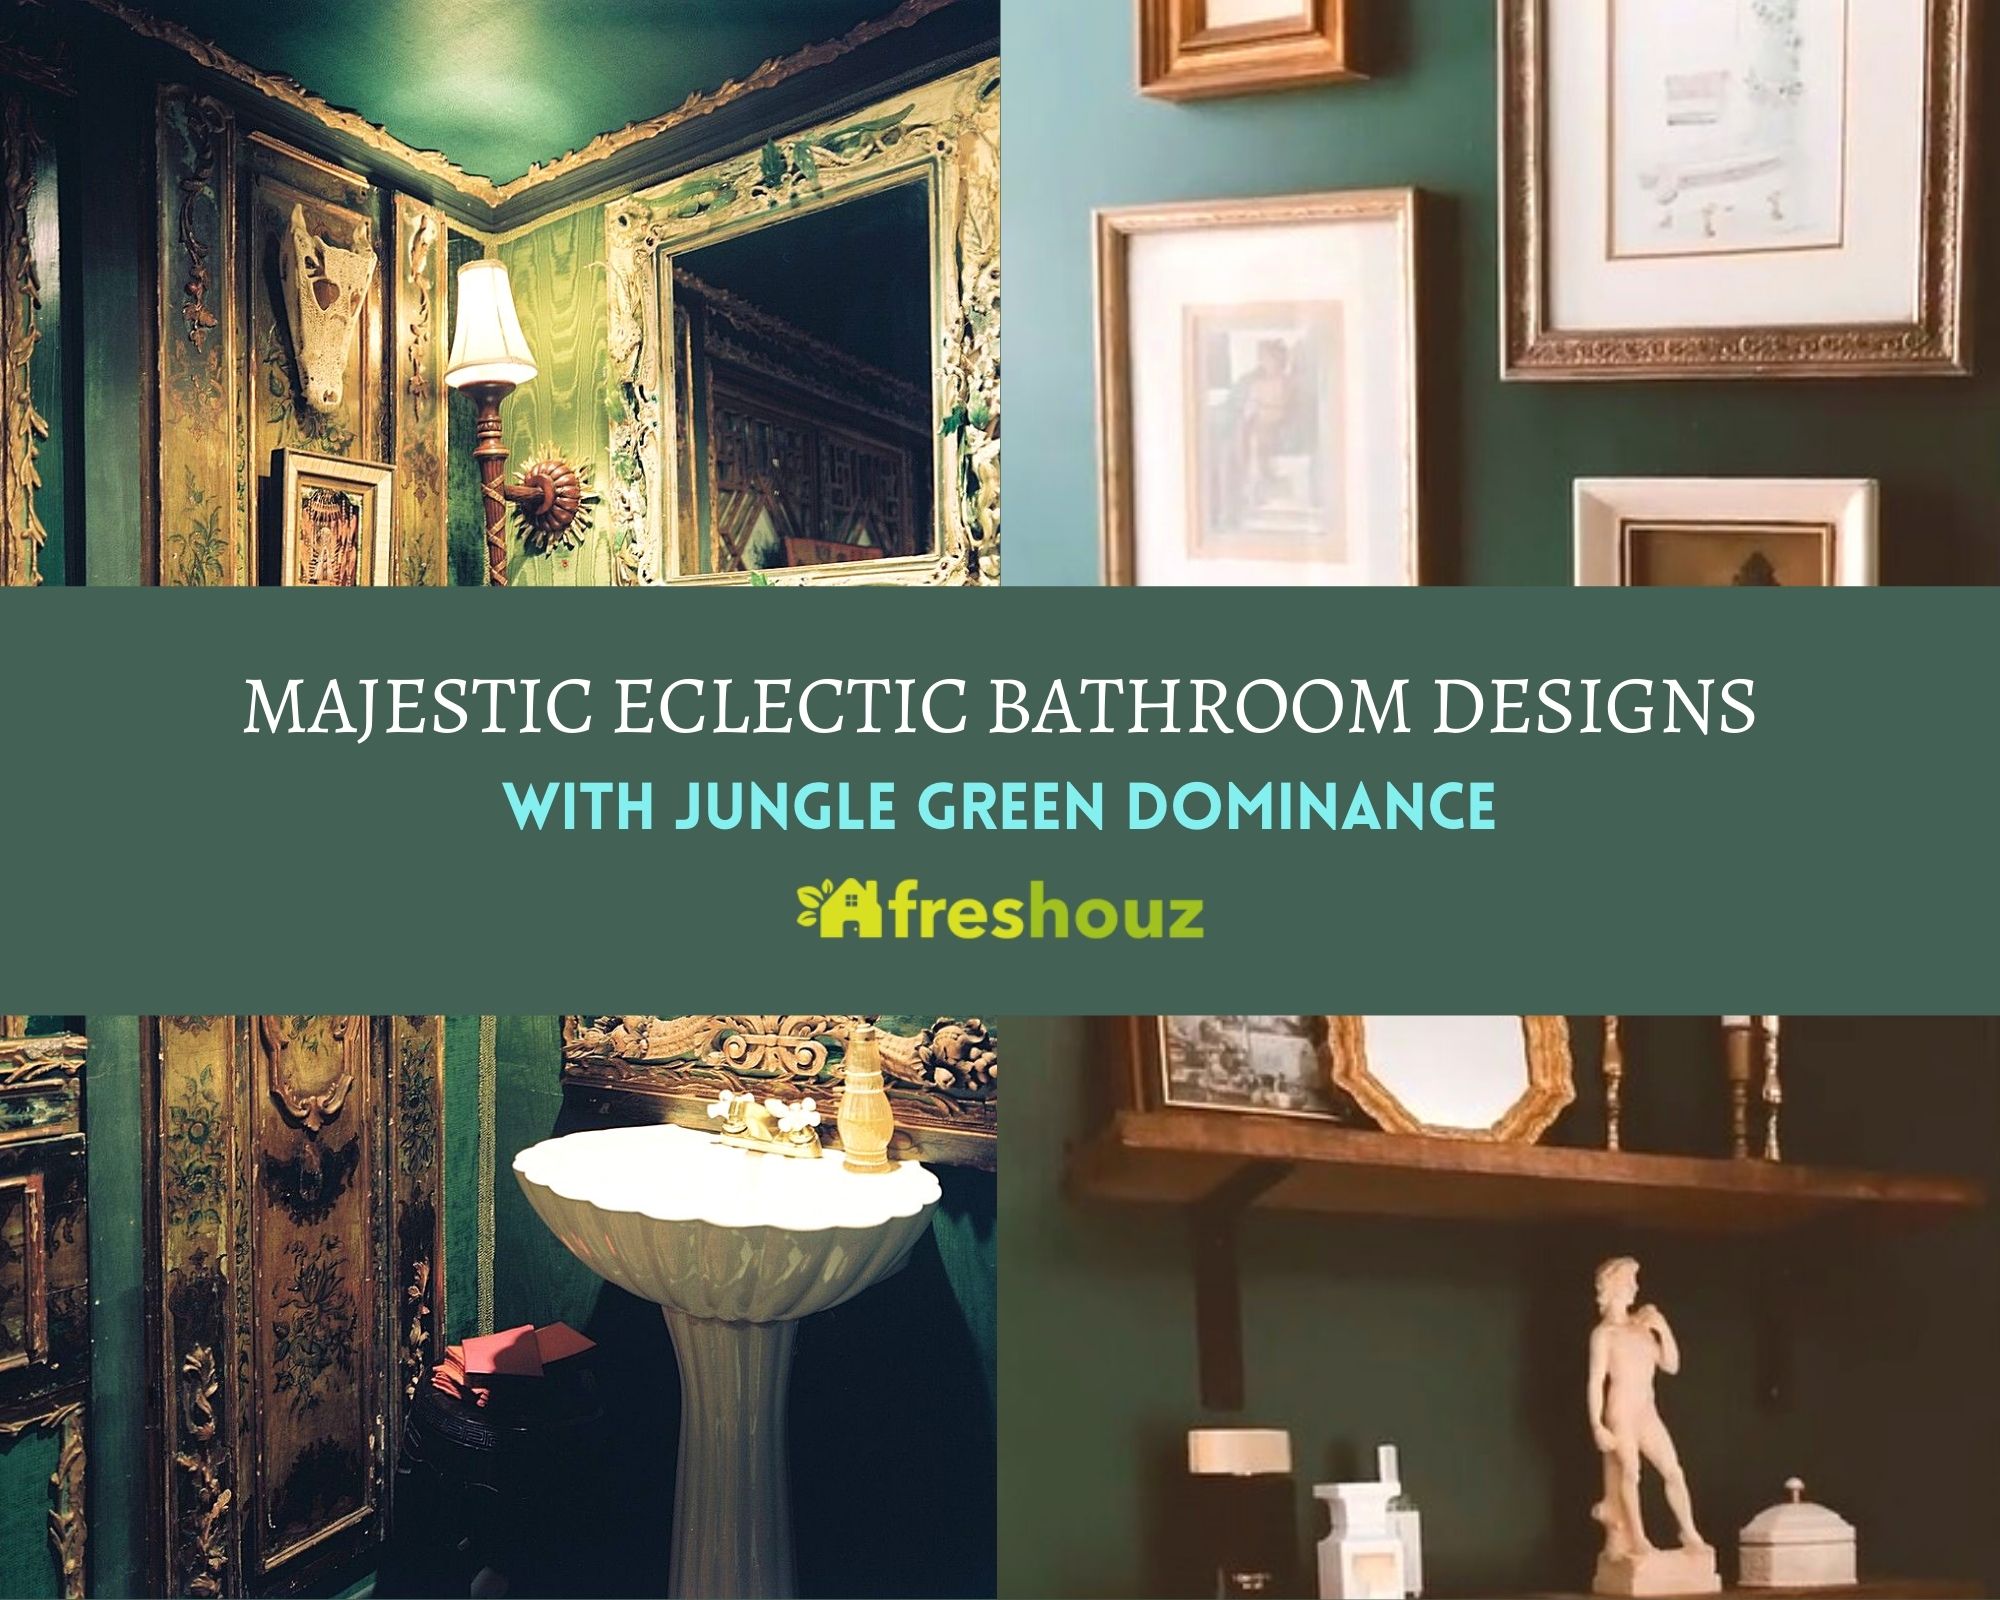 Majestic Eclectic Bathroom Designs With Jungle Green Dominance